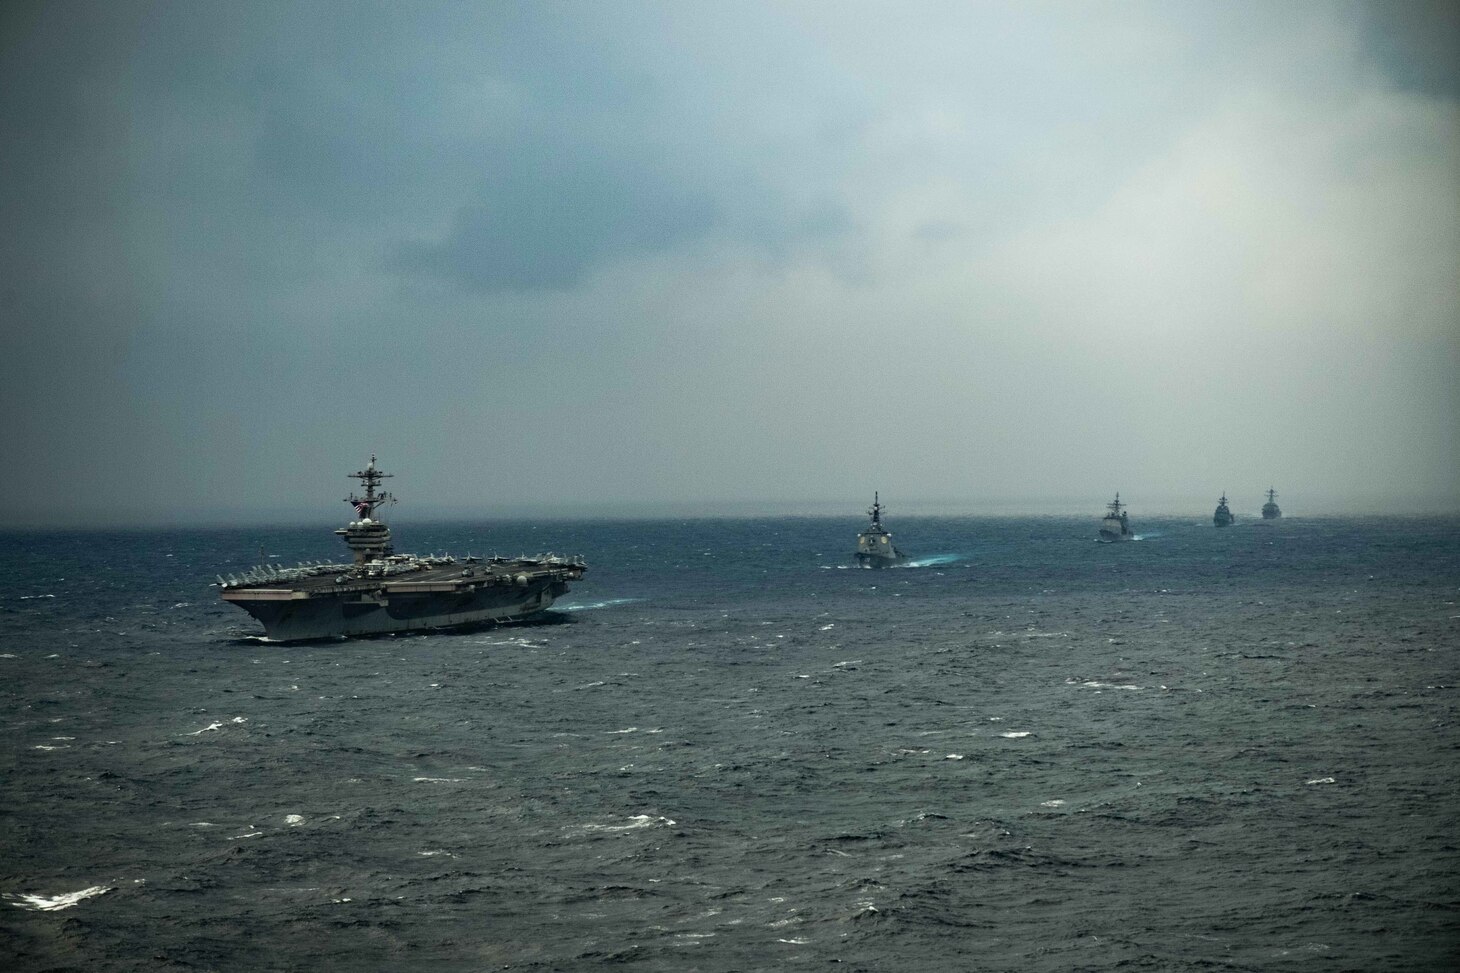 PACIFIC OCEAN (Jan. 15, 2021) – The aircraft carrier USS Theodore Roosevelt (CVN 71), front, Japan Maritime Self-Defense Force (JMSDF) Kongo-class guided-missile destroyer JS Kongo (DDG 173), Ticonderoga-class guided-missile cruiser USS Bunker Hill (CG 52), JMSDF Asahi-class destroyer JS Asahi (DD 119), and Arleigh Burke-class guided-missile destroyer USS John Finn (DDG 113) transit the Pacific Ocean Jan. 15, 2021. The Theodore Roosevelt Carrier Strike Group is on a scheduled deployment to the U.S. 7th Fleet area of operations. As the U.S. Navy's largest forward deployed fleet, with its approximate 50-70 ships and submarines, 140 aircraft, and 20,000 Sailors in the area of operations at any given time, 7th Fleet conducts forward-deployed naval operations in support of U.S. national interests throughout a free and open Indo-Pacific area of operations to foster maritime security, promote stability, and prevent conflict alongside 35 other maritime nations and partners. (U.S. Navy photo by Mass Communication Specialist 3rd Class Brandon Richardson)